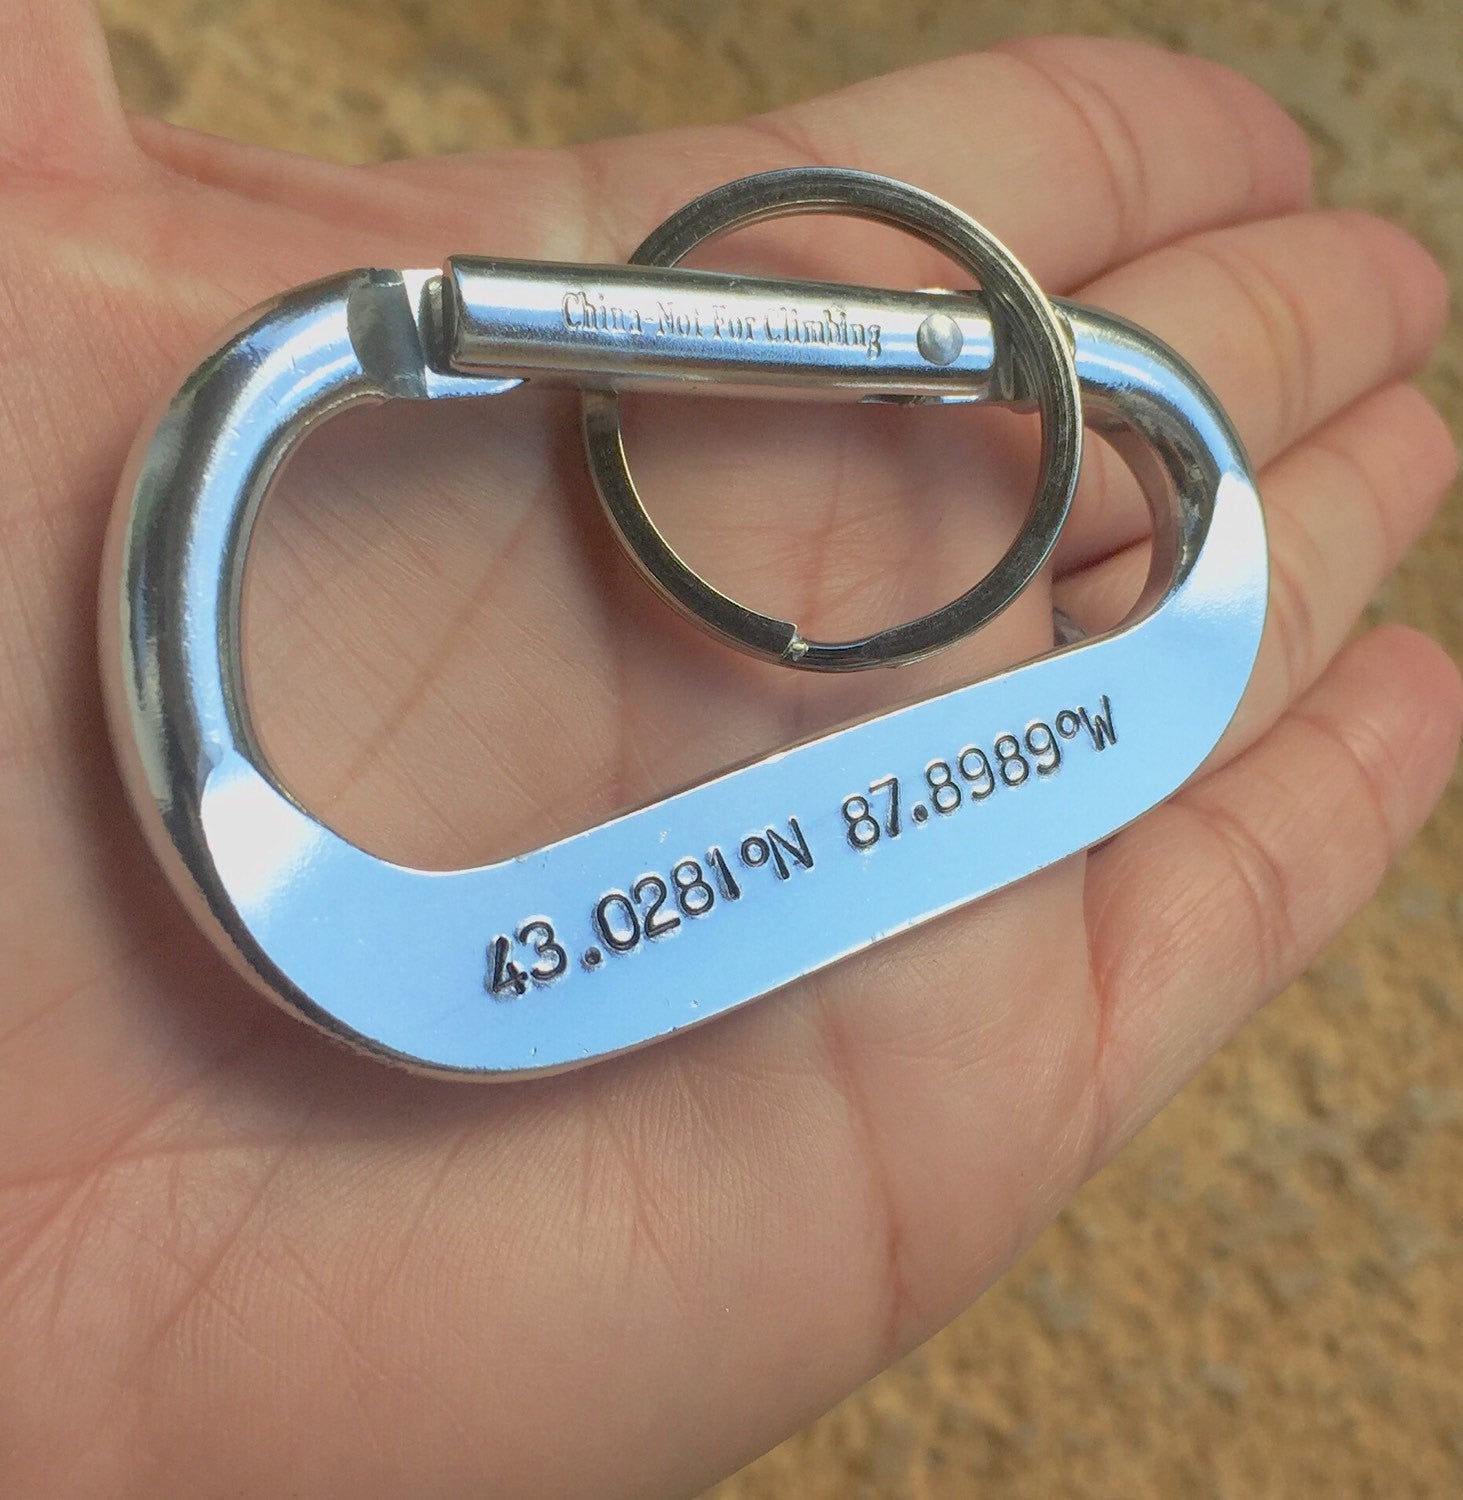 Personalized Carabiner, Carabiner, Hand Stamped Carabiner Featured In US Weekly - Natashaaloha, jewelry, bracelets, necklace, keychains, fishing lures, gifts for men, charms, personalized, 